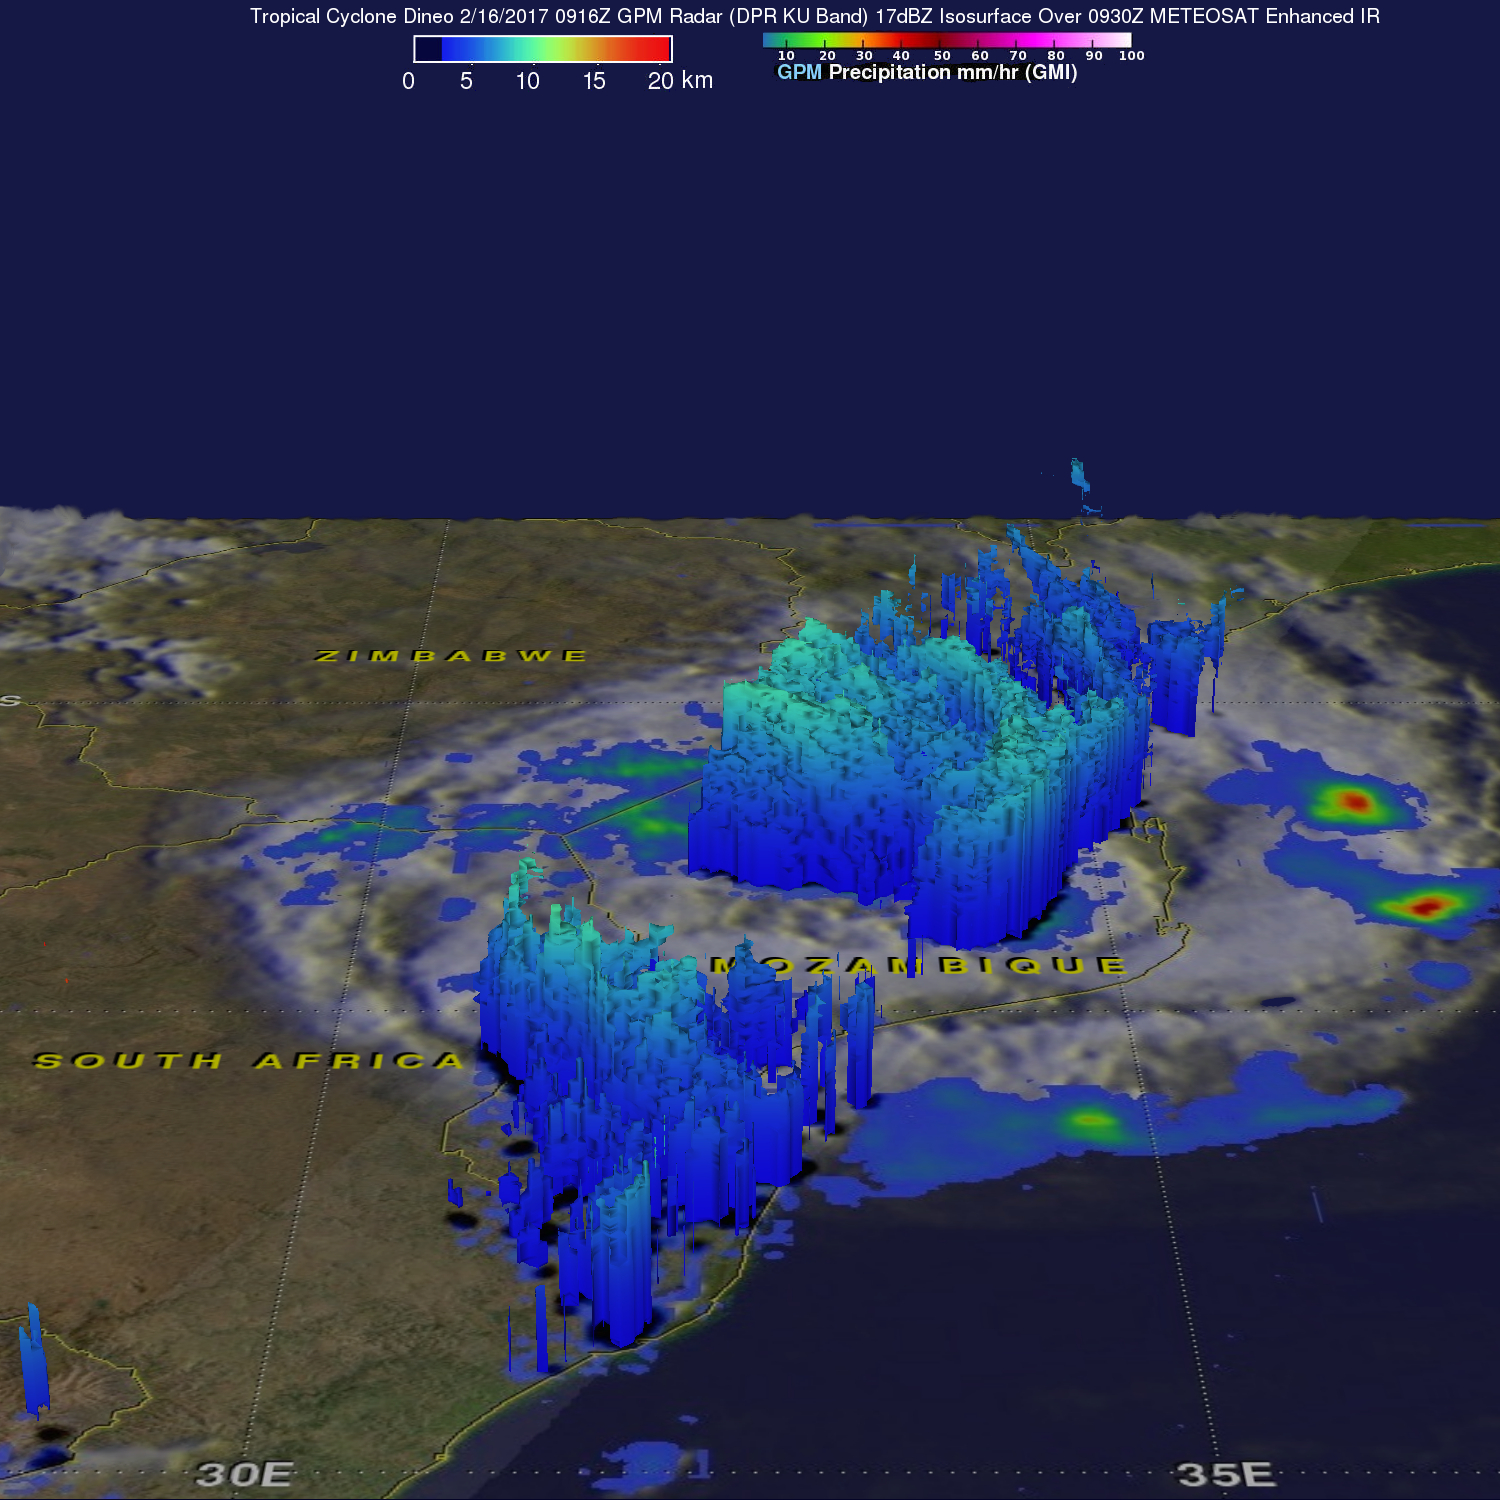 GPM Examines Deadly Tropical Cyclone Dineo 